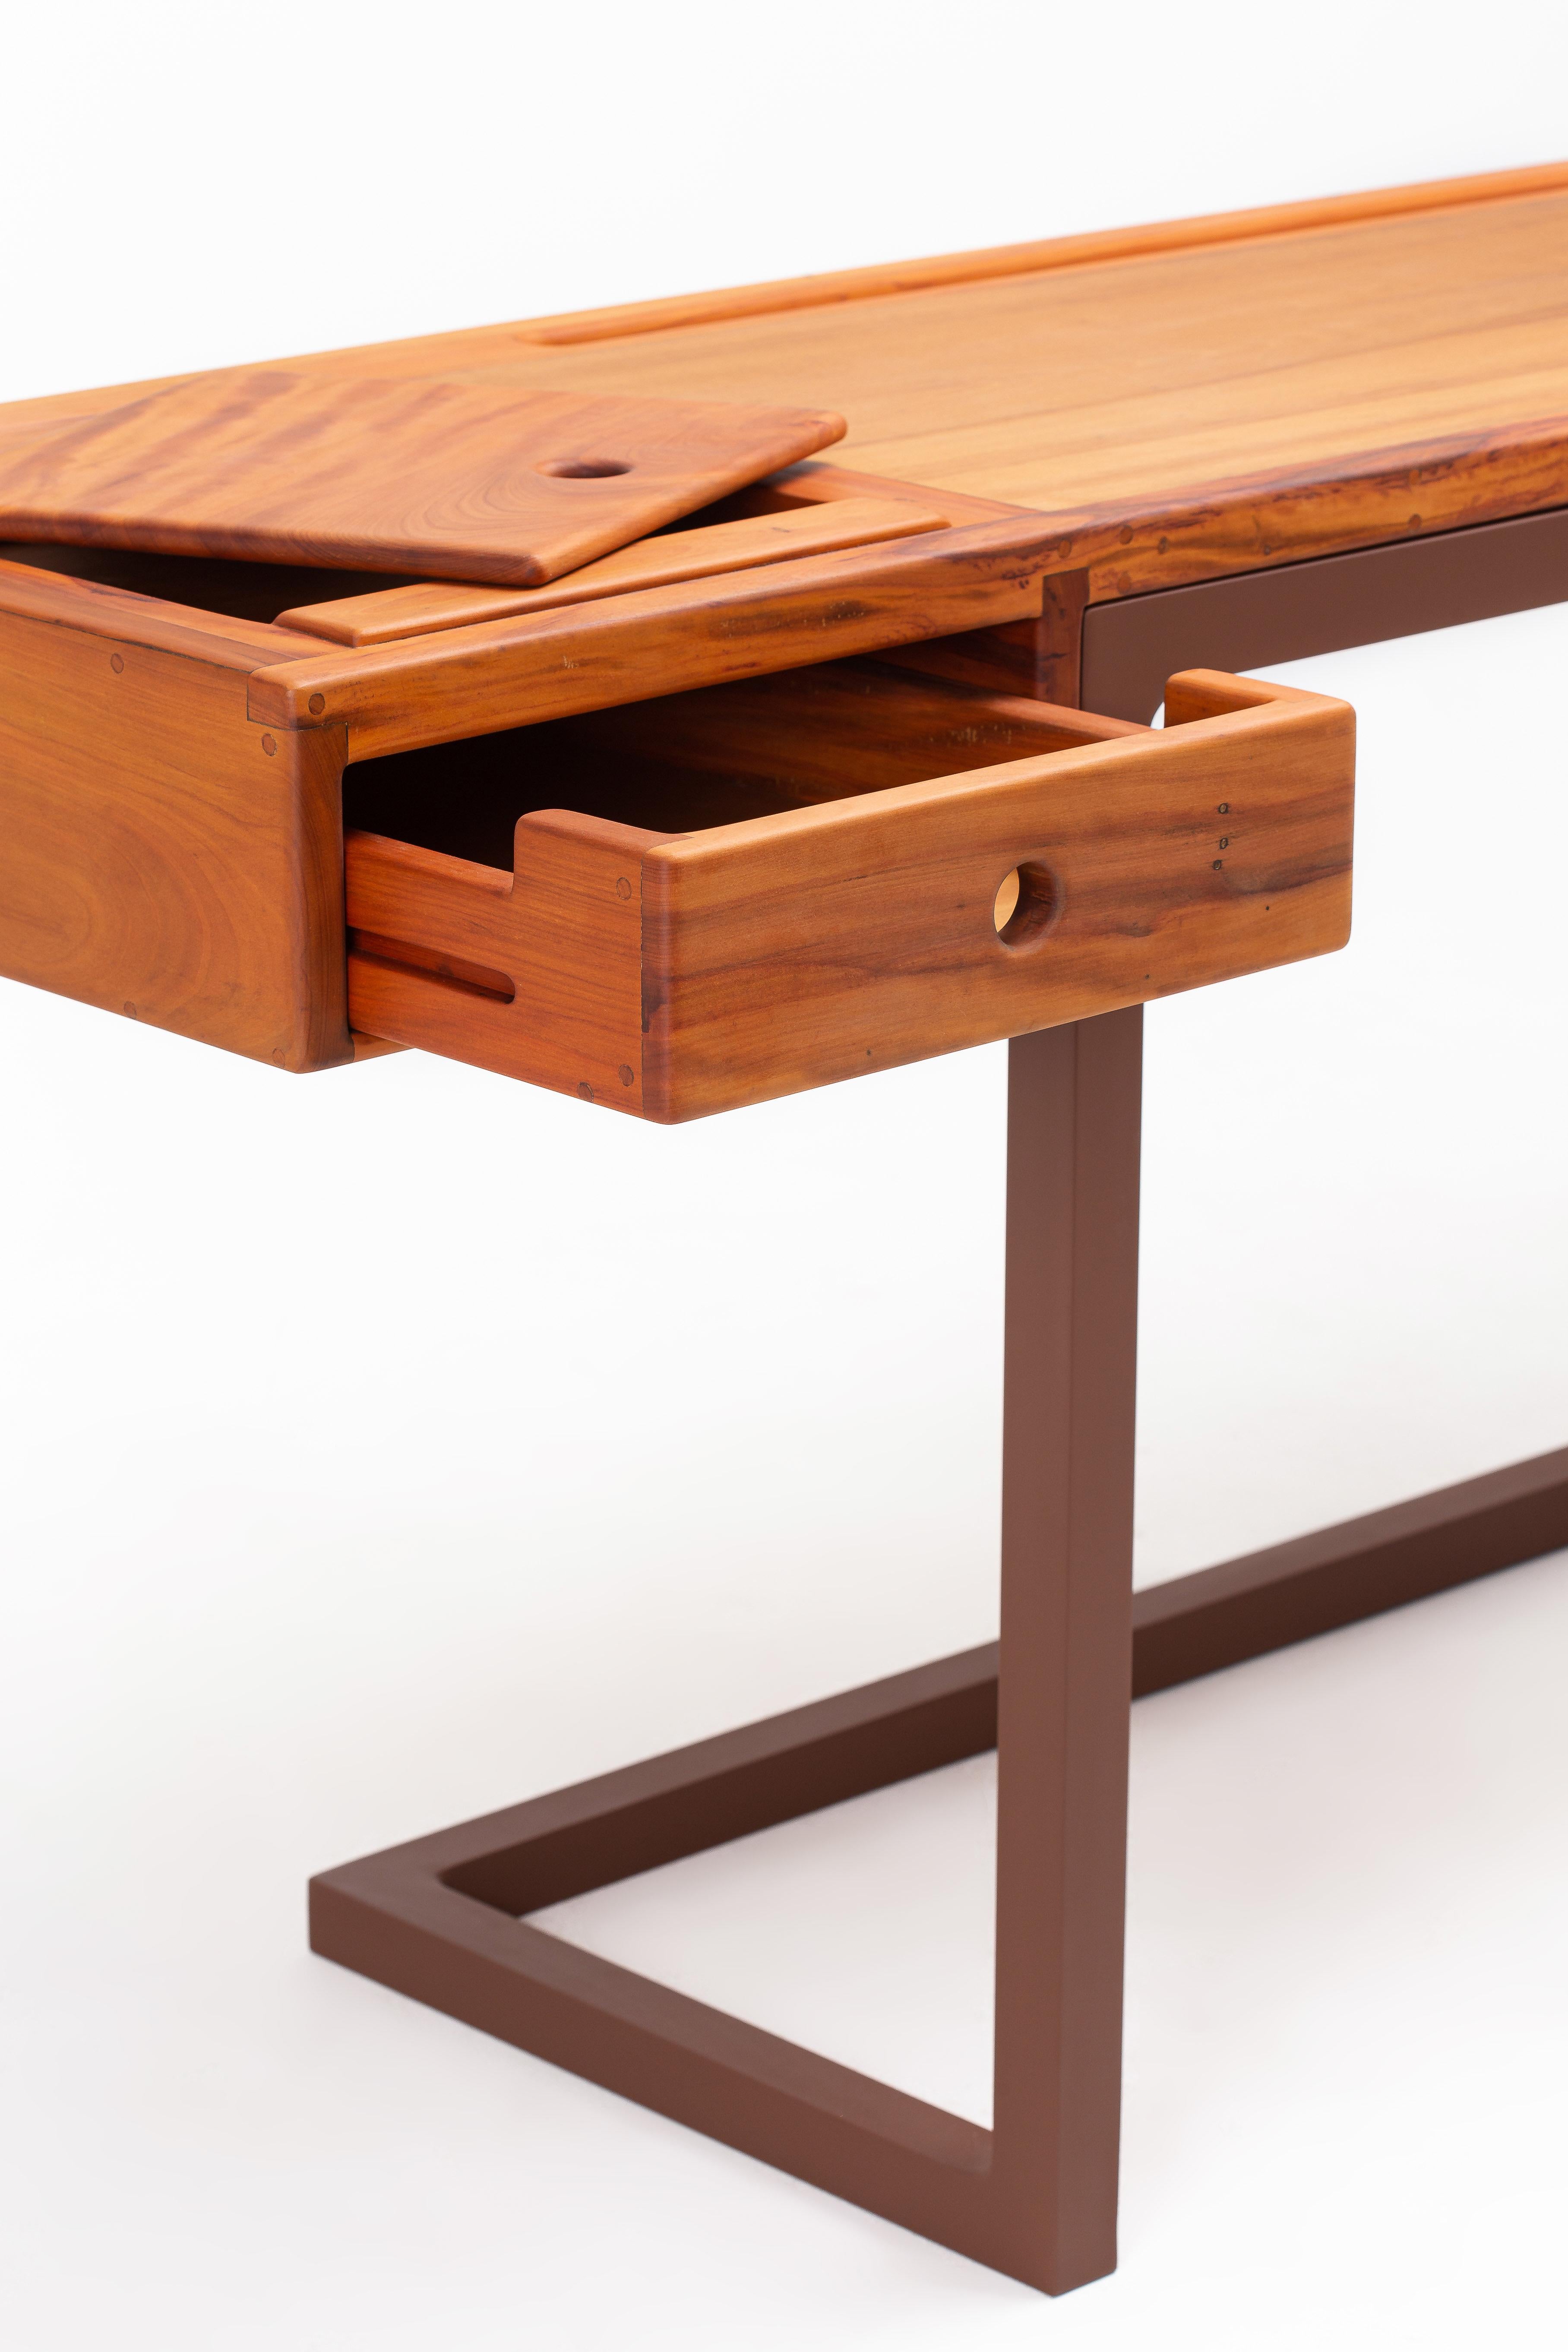 Hand-Crafted Minimalist Brazilian Handcrafted Peroba Desk ''Cantilever'' by Dimitrih Correa For Sale